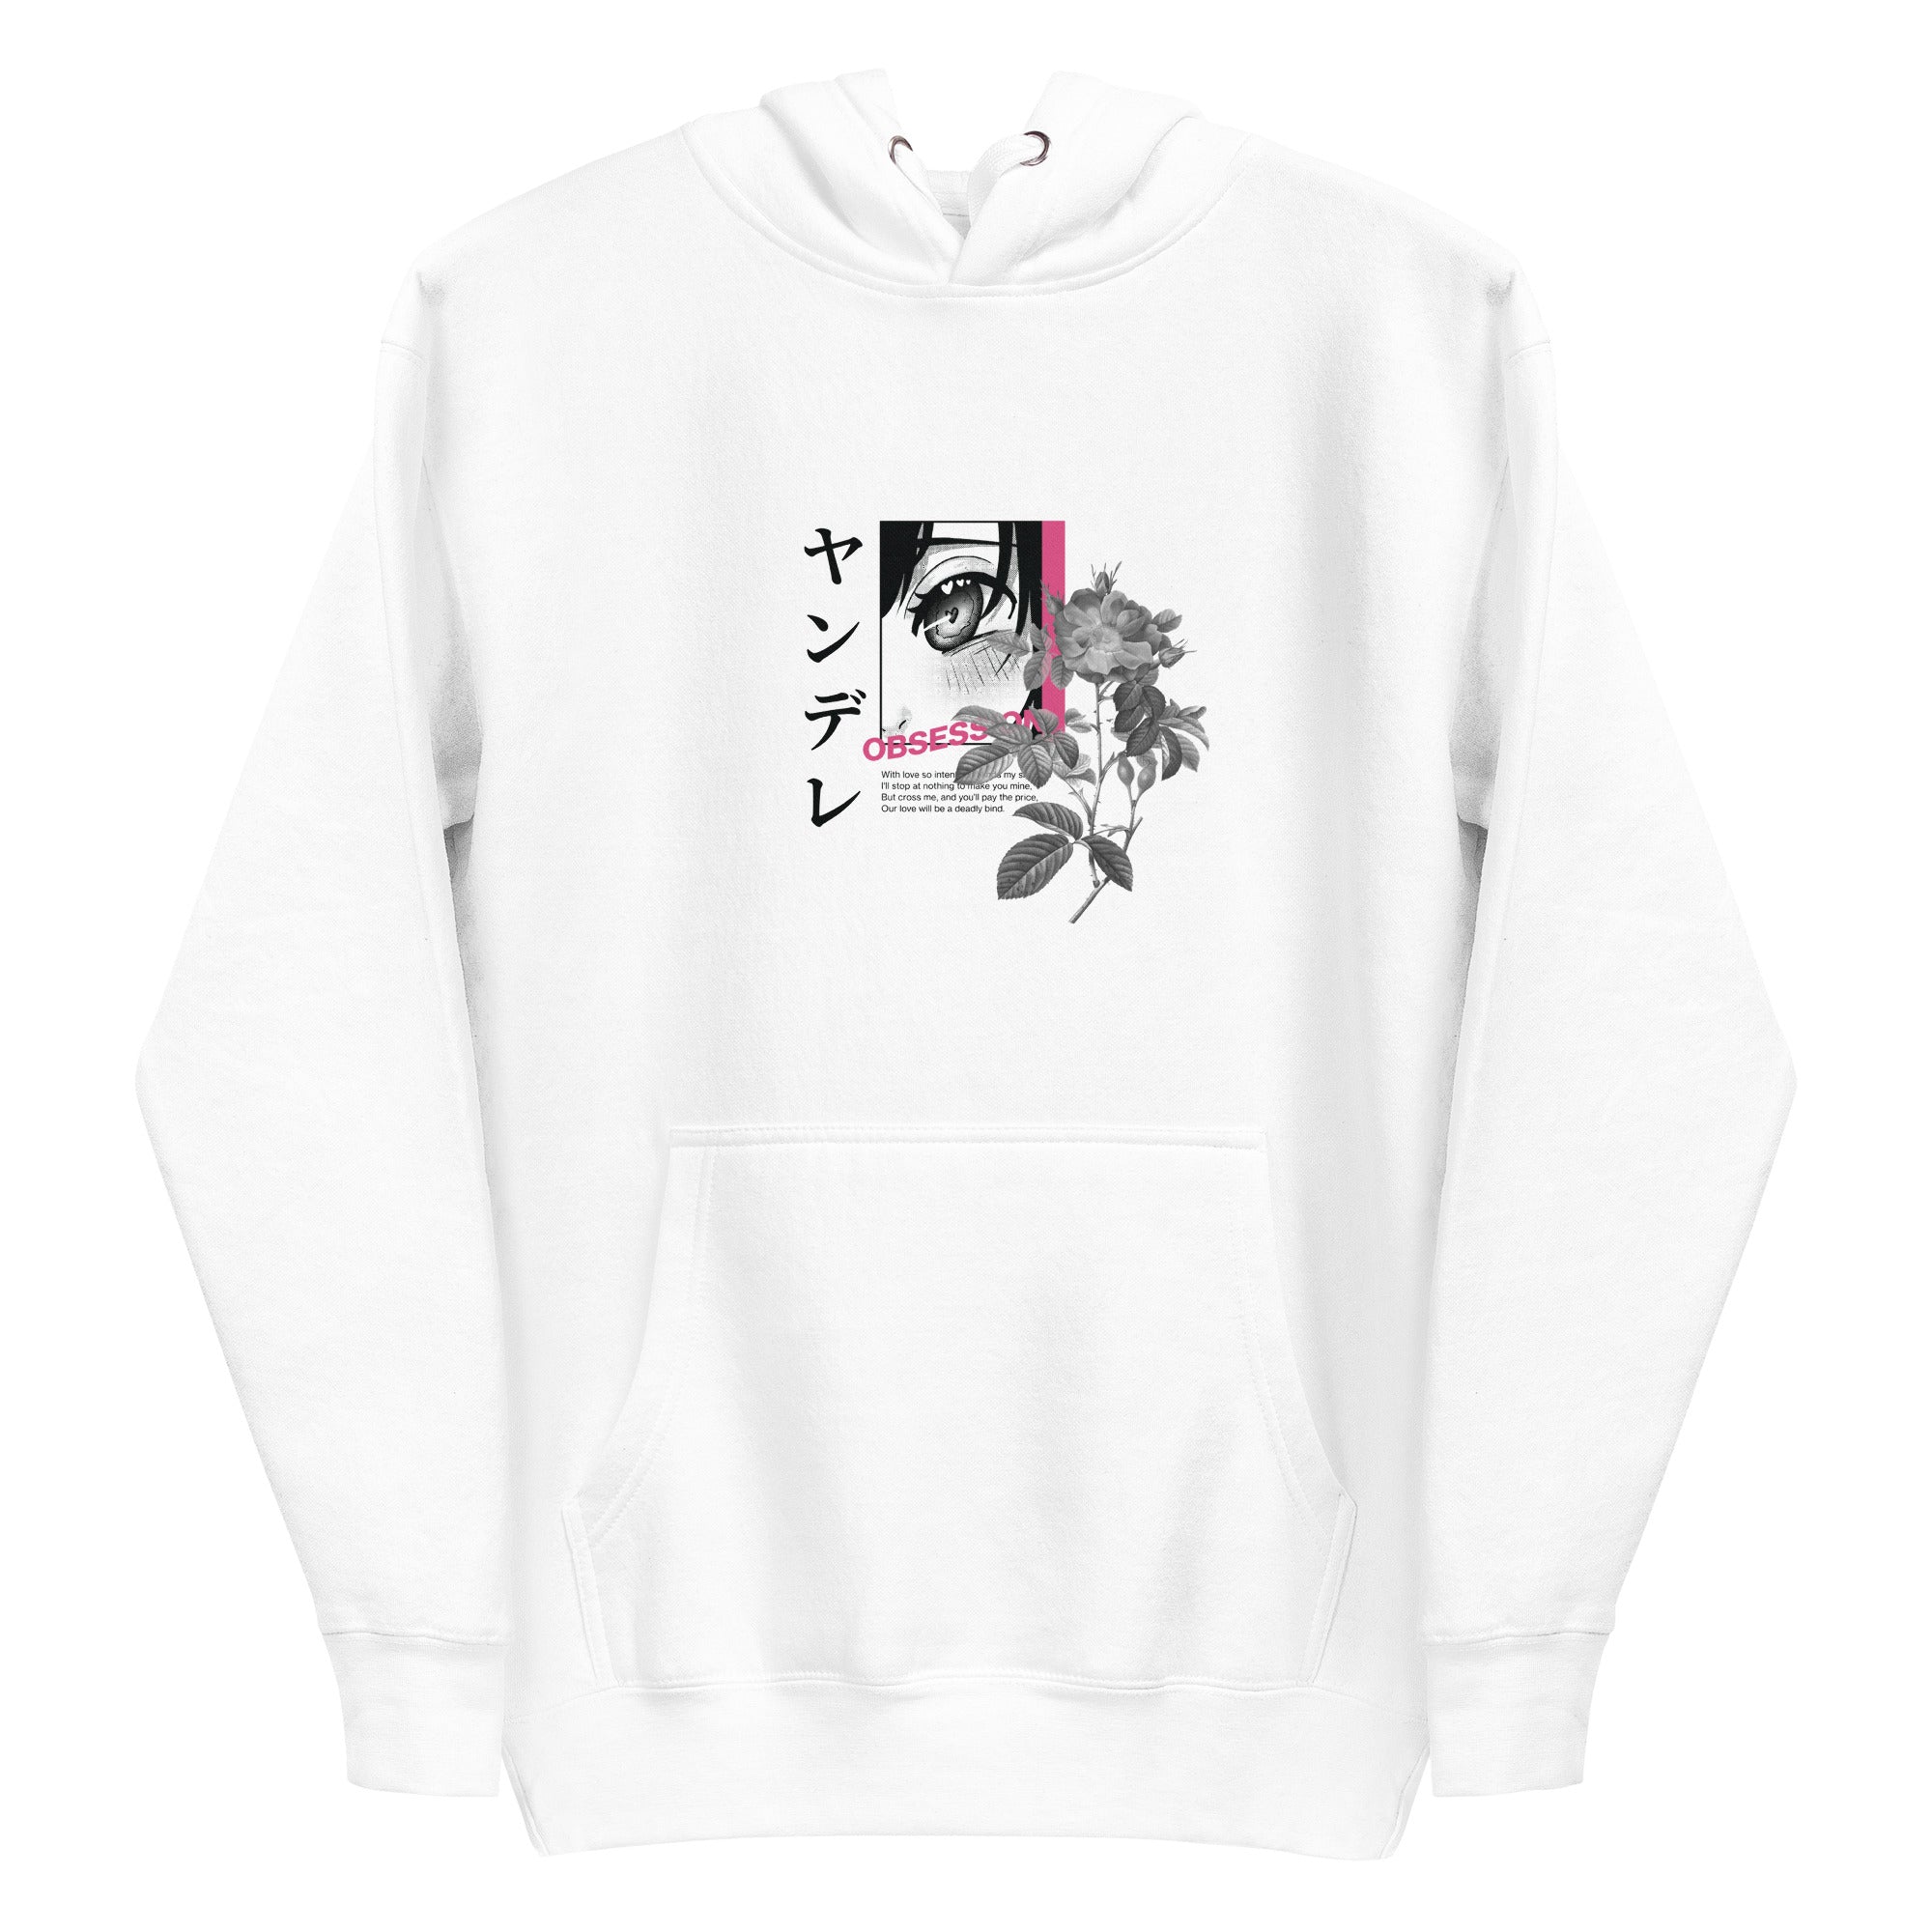 OBSESSION • anime hoodie - Jackler - anime-inspired streetwear - anime clothing